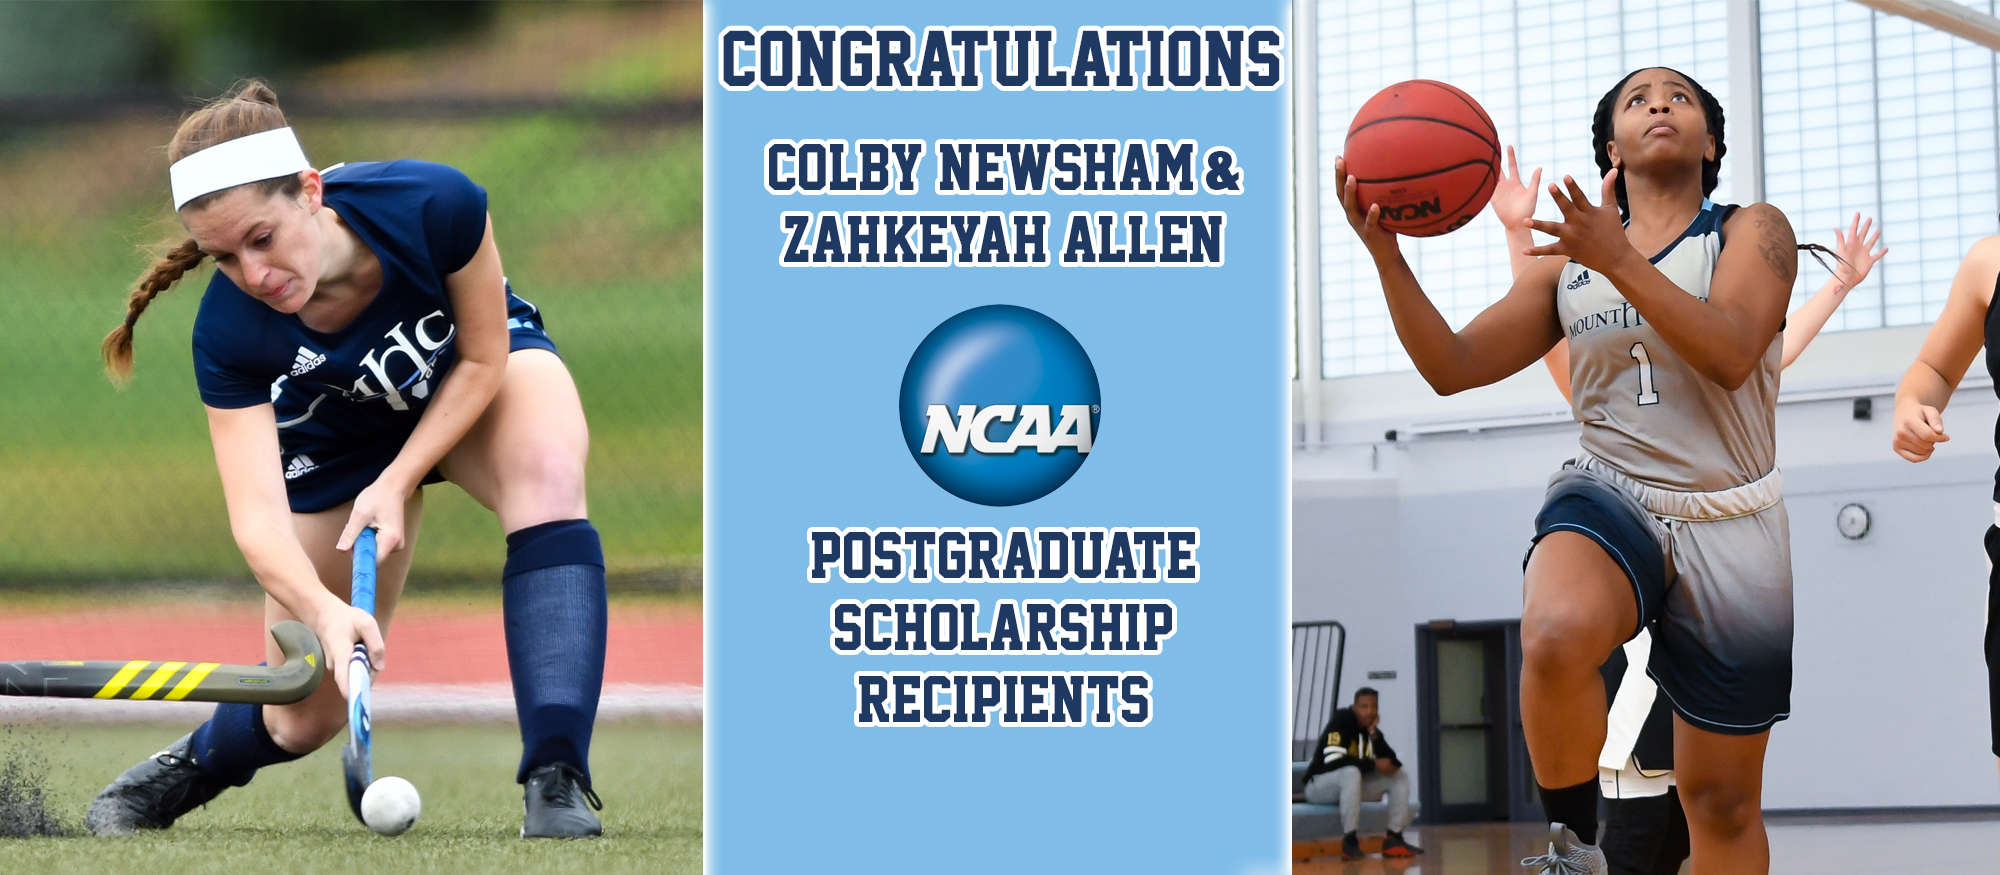 Graphic promoting field hockey's Colby Newsham and basketball's Zahkeyah Allen, both of whom received NCAA Postgraduate Scholarships.